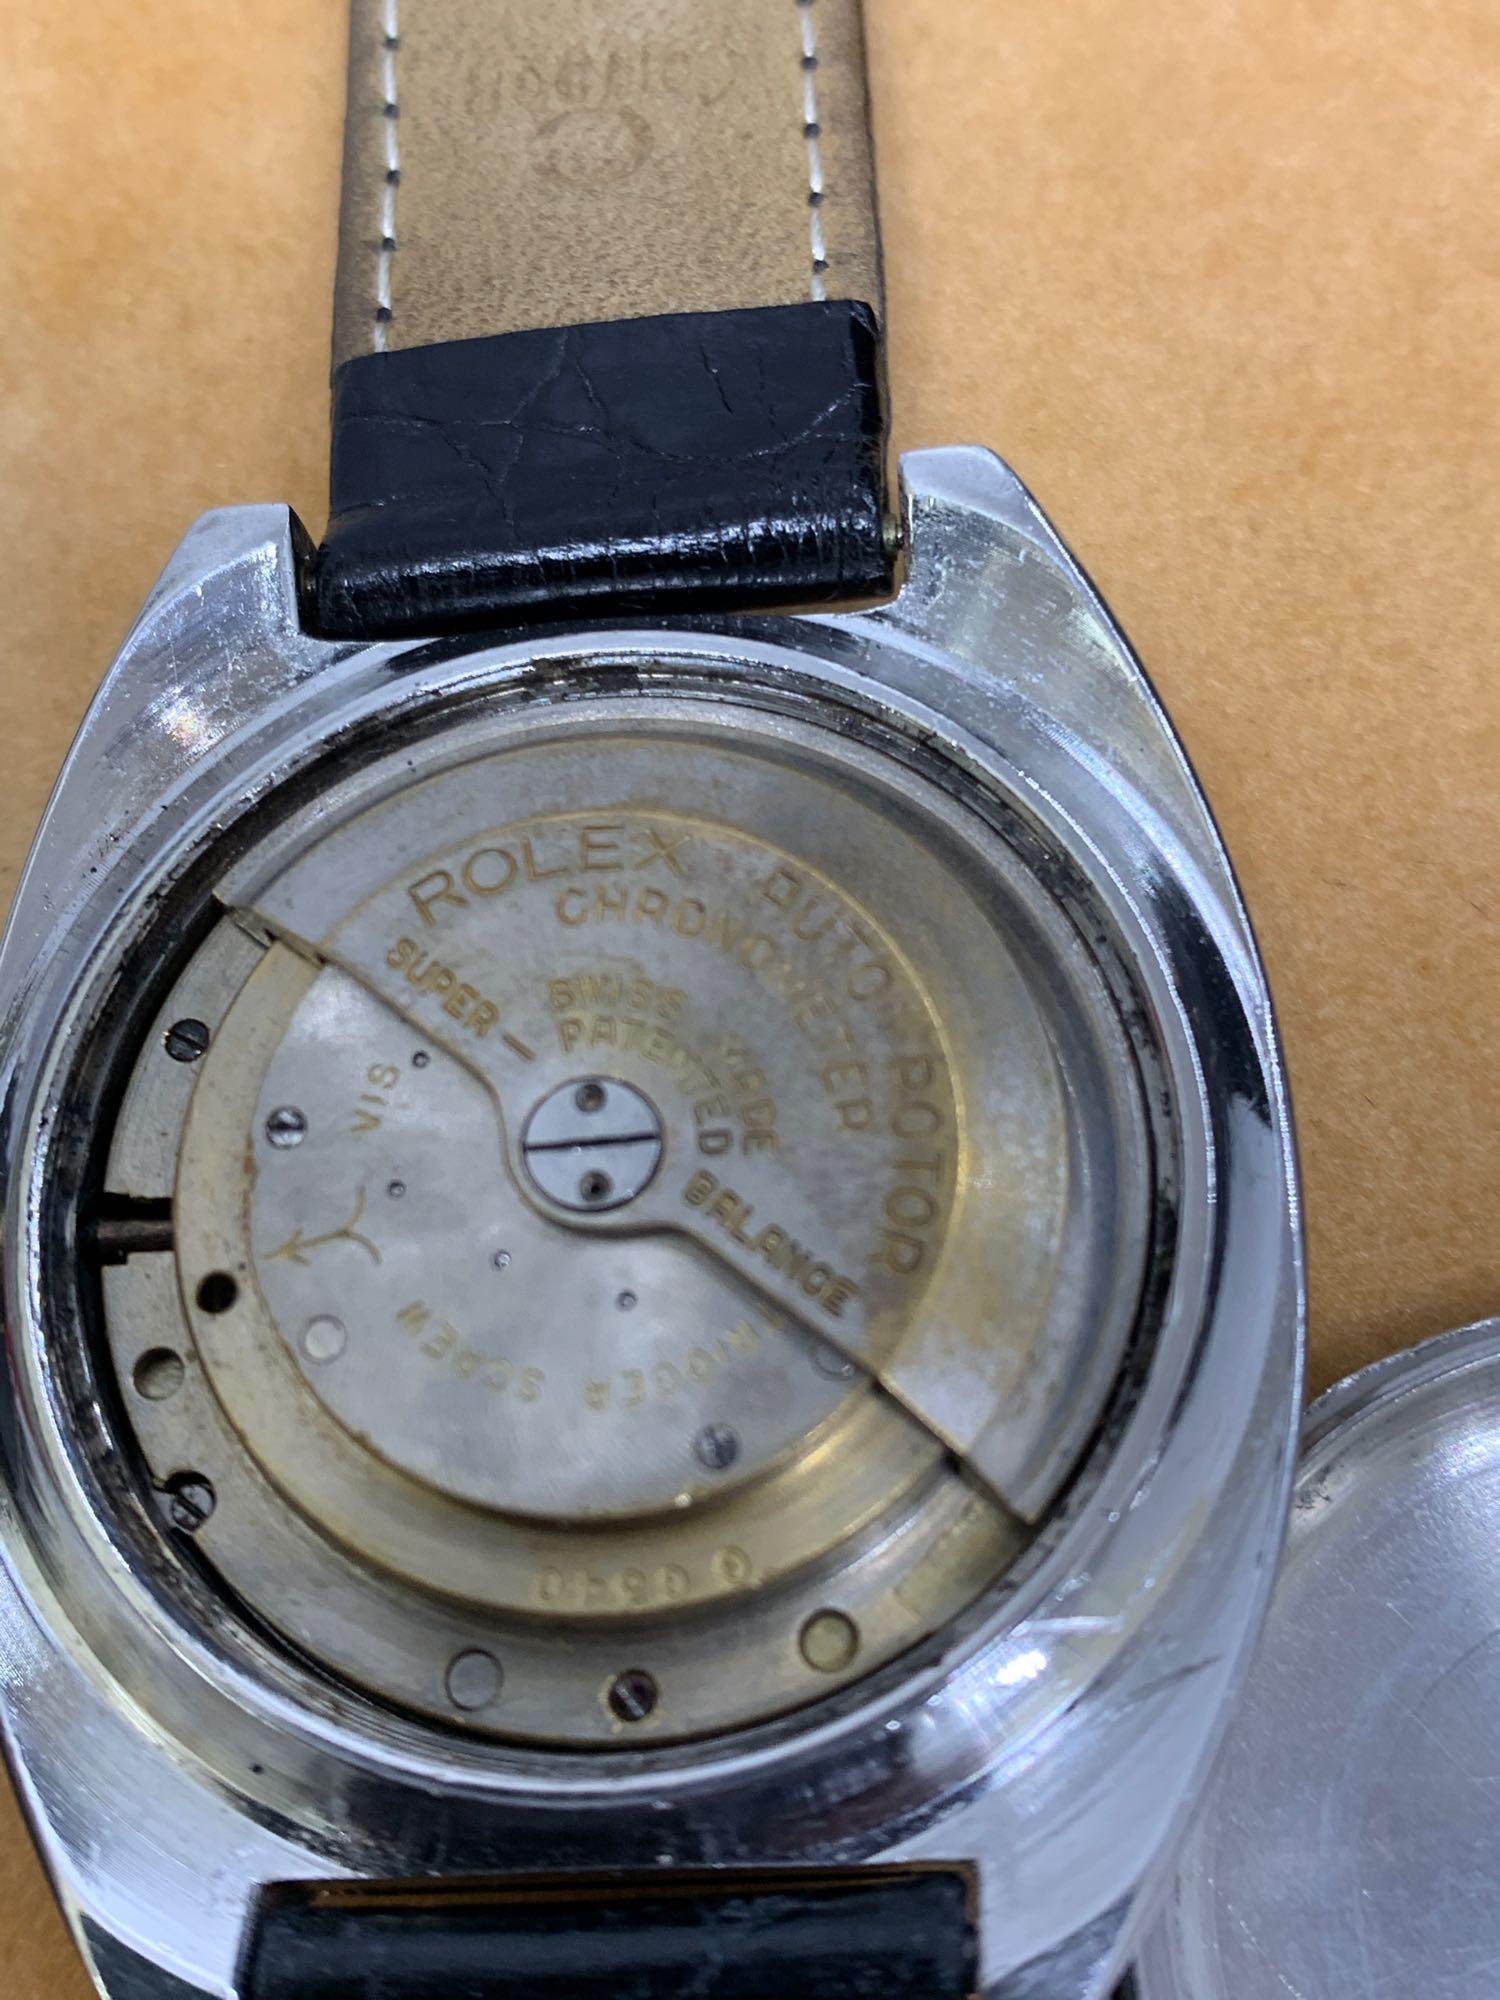 Vintage 40mm S/Steel Watch Marked Rolex - Movement checked and verified as Rolex, Automatic - Image 4 of 7